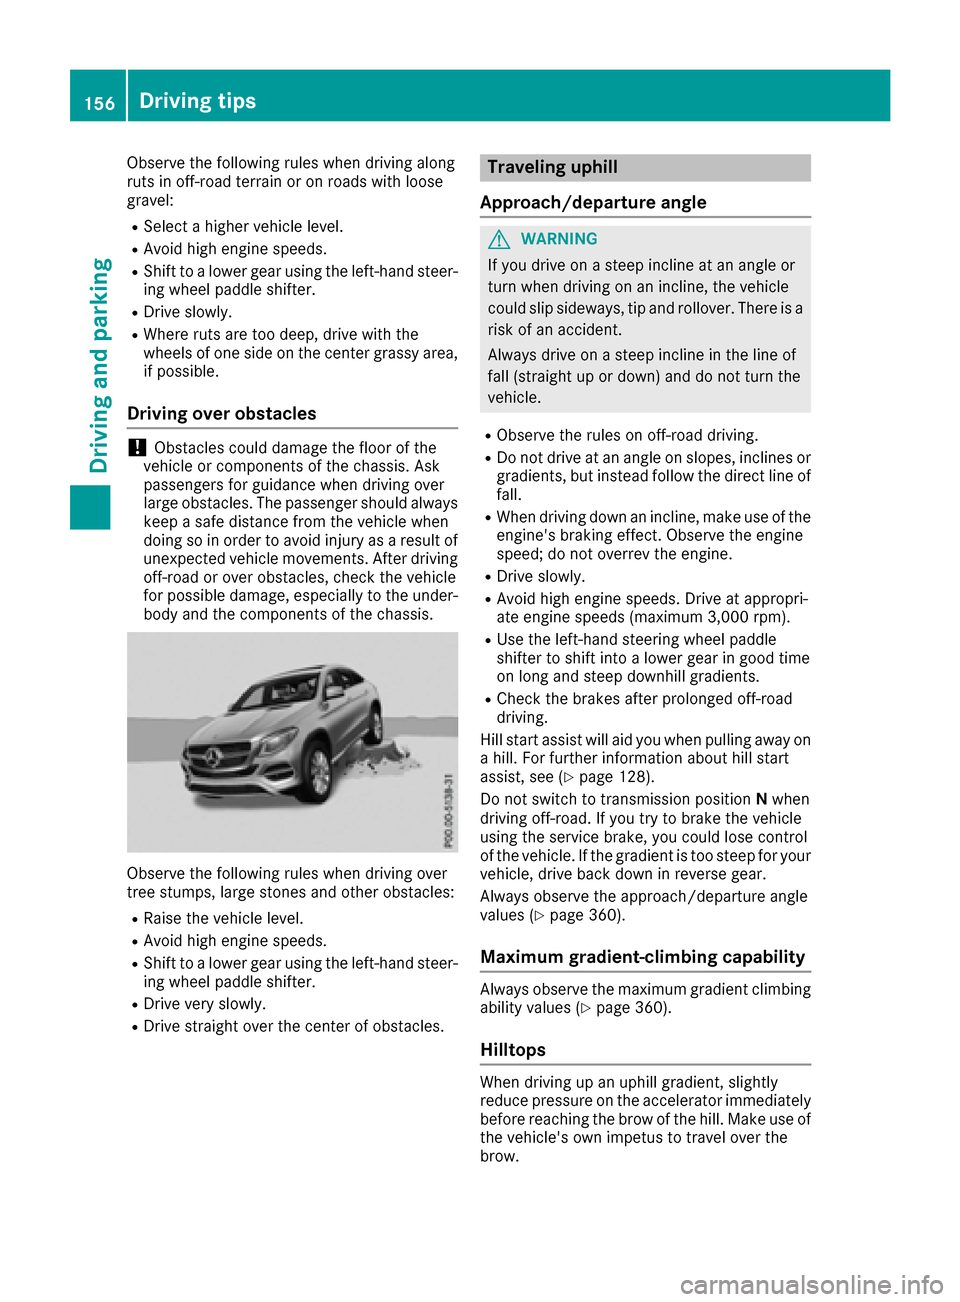 MERCEDES-BENZ GLE COUPE 2017 C292 Workshop Manual Observe the following rules when driving along
ruts in off-road terrain or on roads with loose
gravel:
RSelect a higher vehicle level.
RAvoid high engine speeds.
RShift to a lower gear using the left-